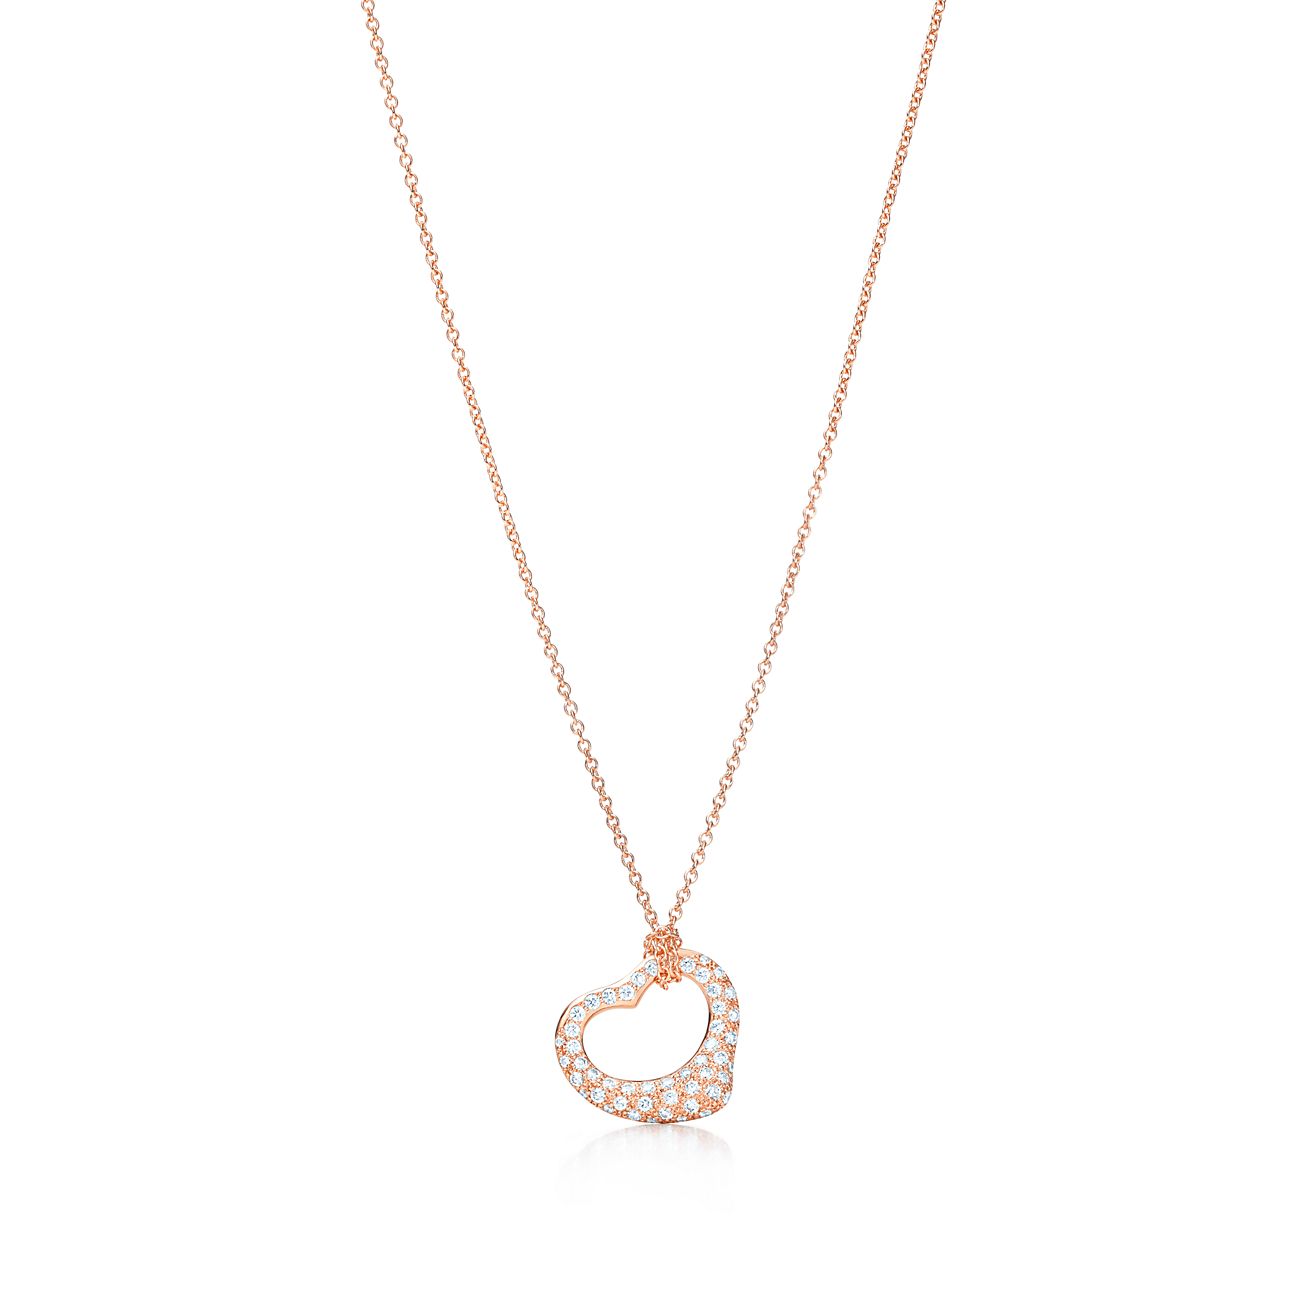 Elsa Peretti Open Heart Pendant in 18K Gold. More Sizes Available, Size: 22 mm